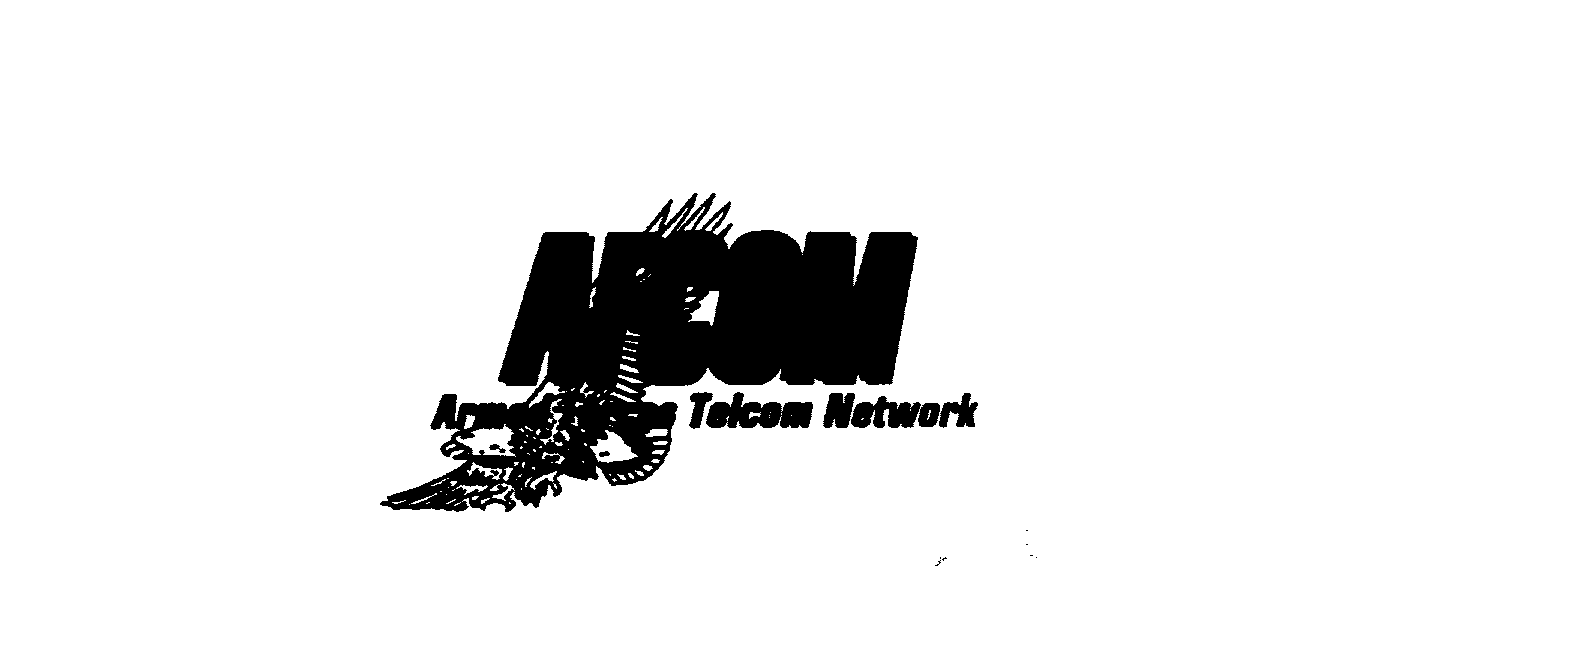  AFCON ARMED FORCES TELCOM NETWORK